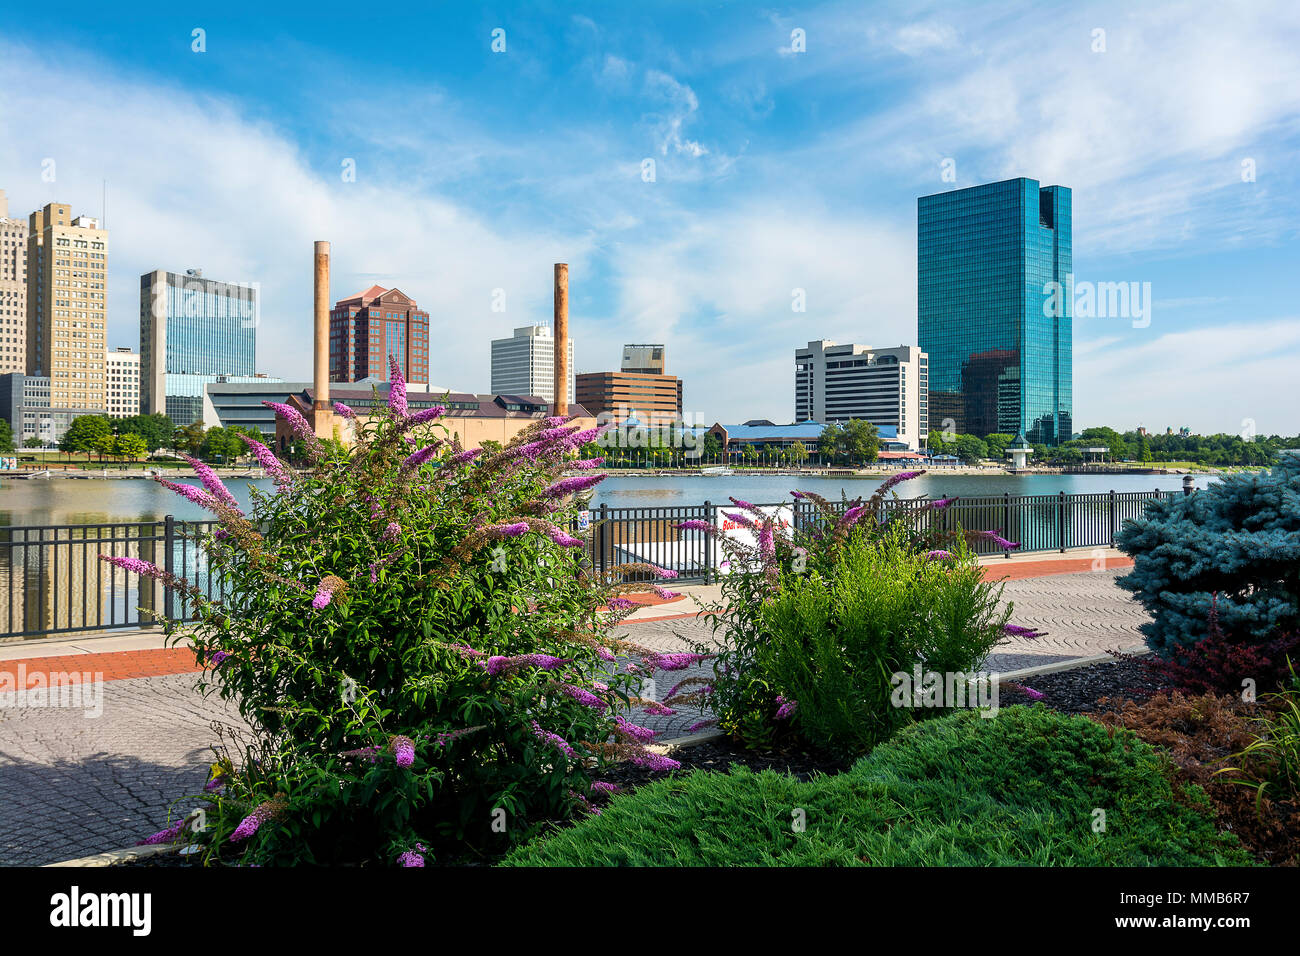 A panoramic view of downtown Toledo Ohio's skyline from across the Maumee River at the Docks.  A beautiful blue sky with white clouds for a backdrop. Stock Photo